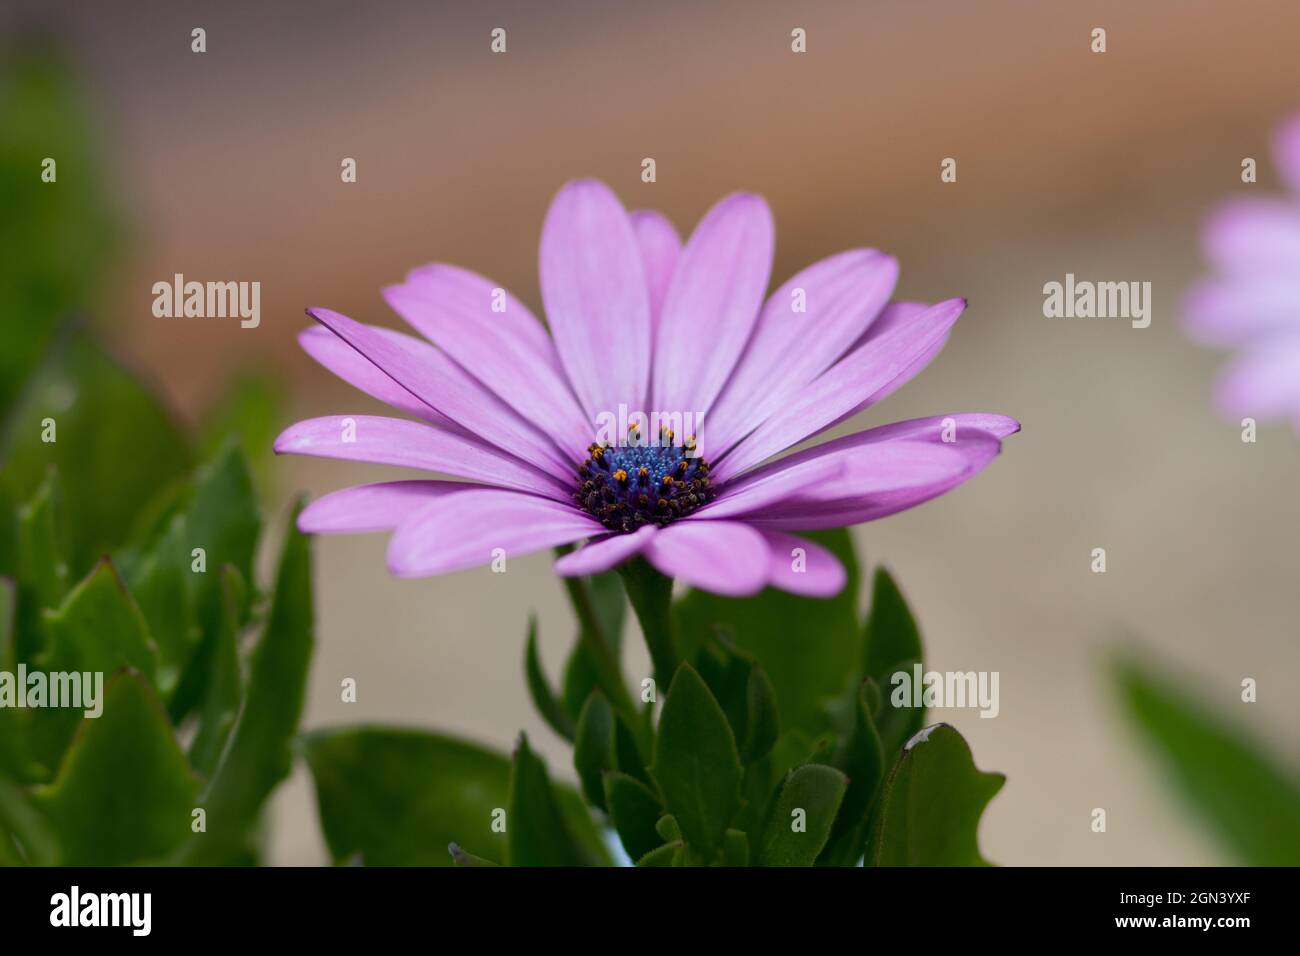 Pink Marguerite Daisy Flower Blooming In The Garden Stock Photo